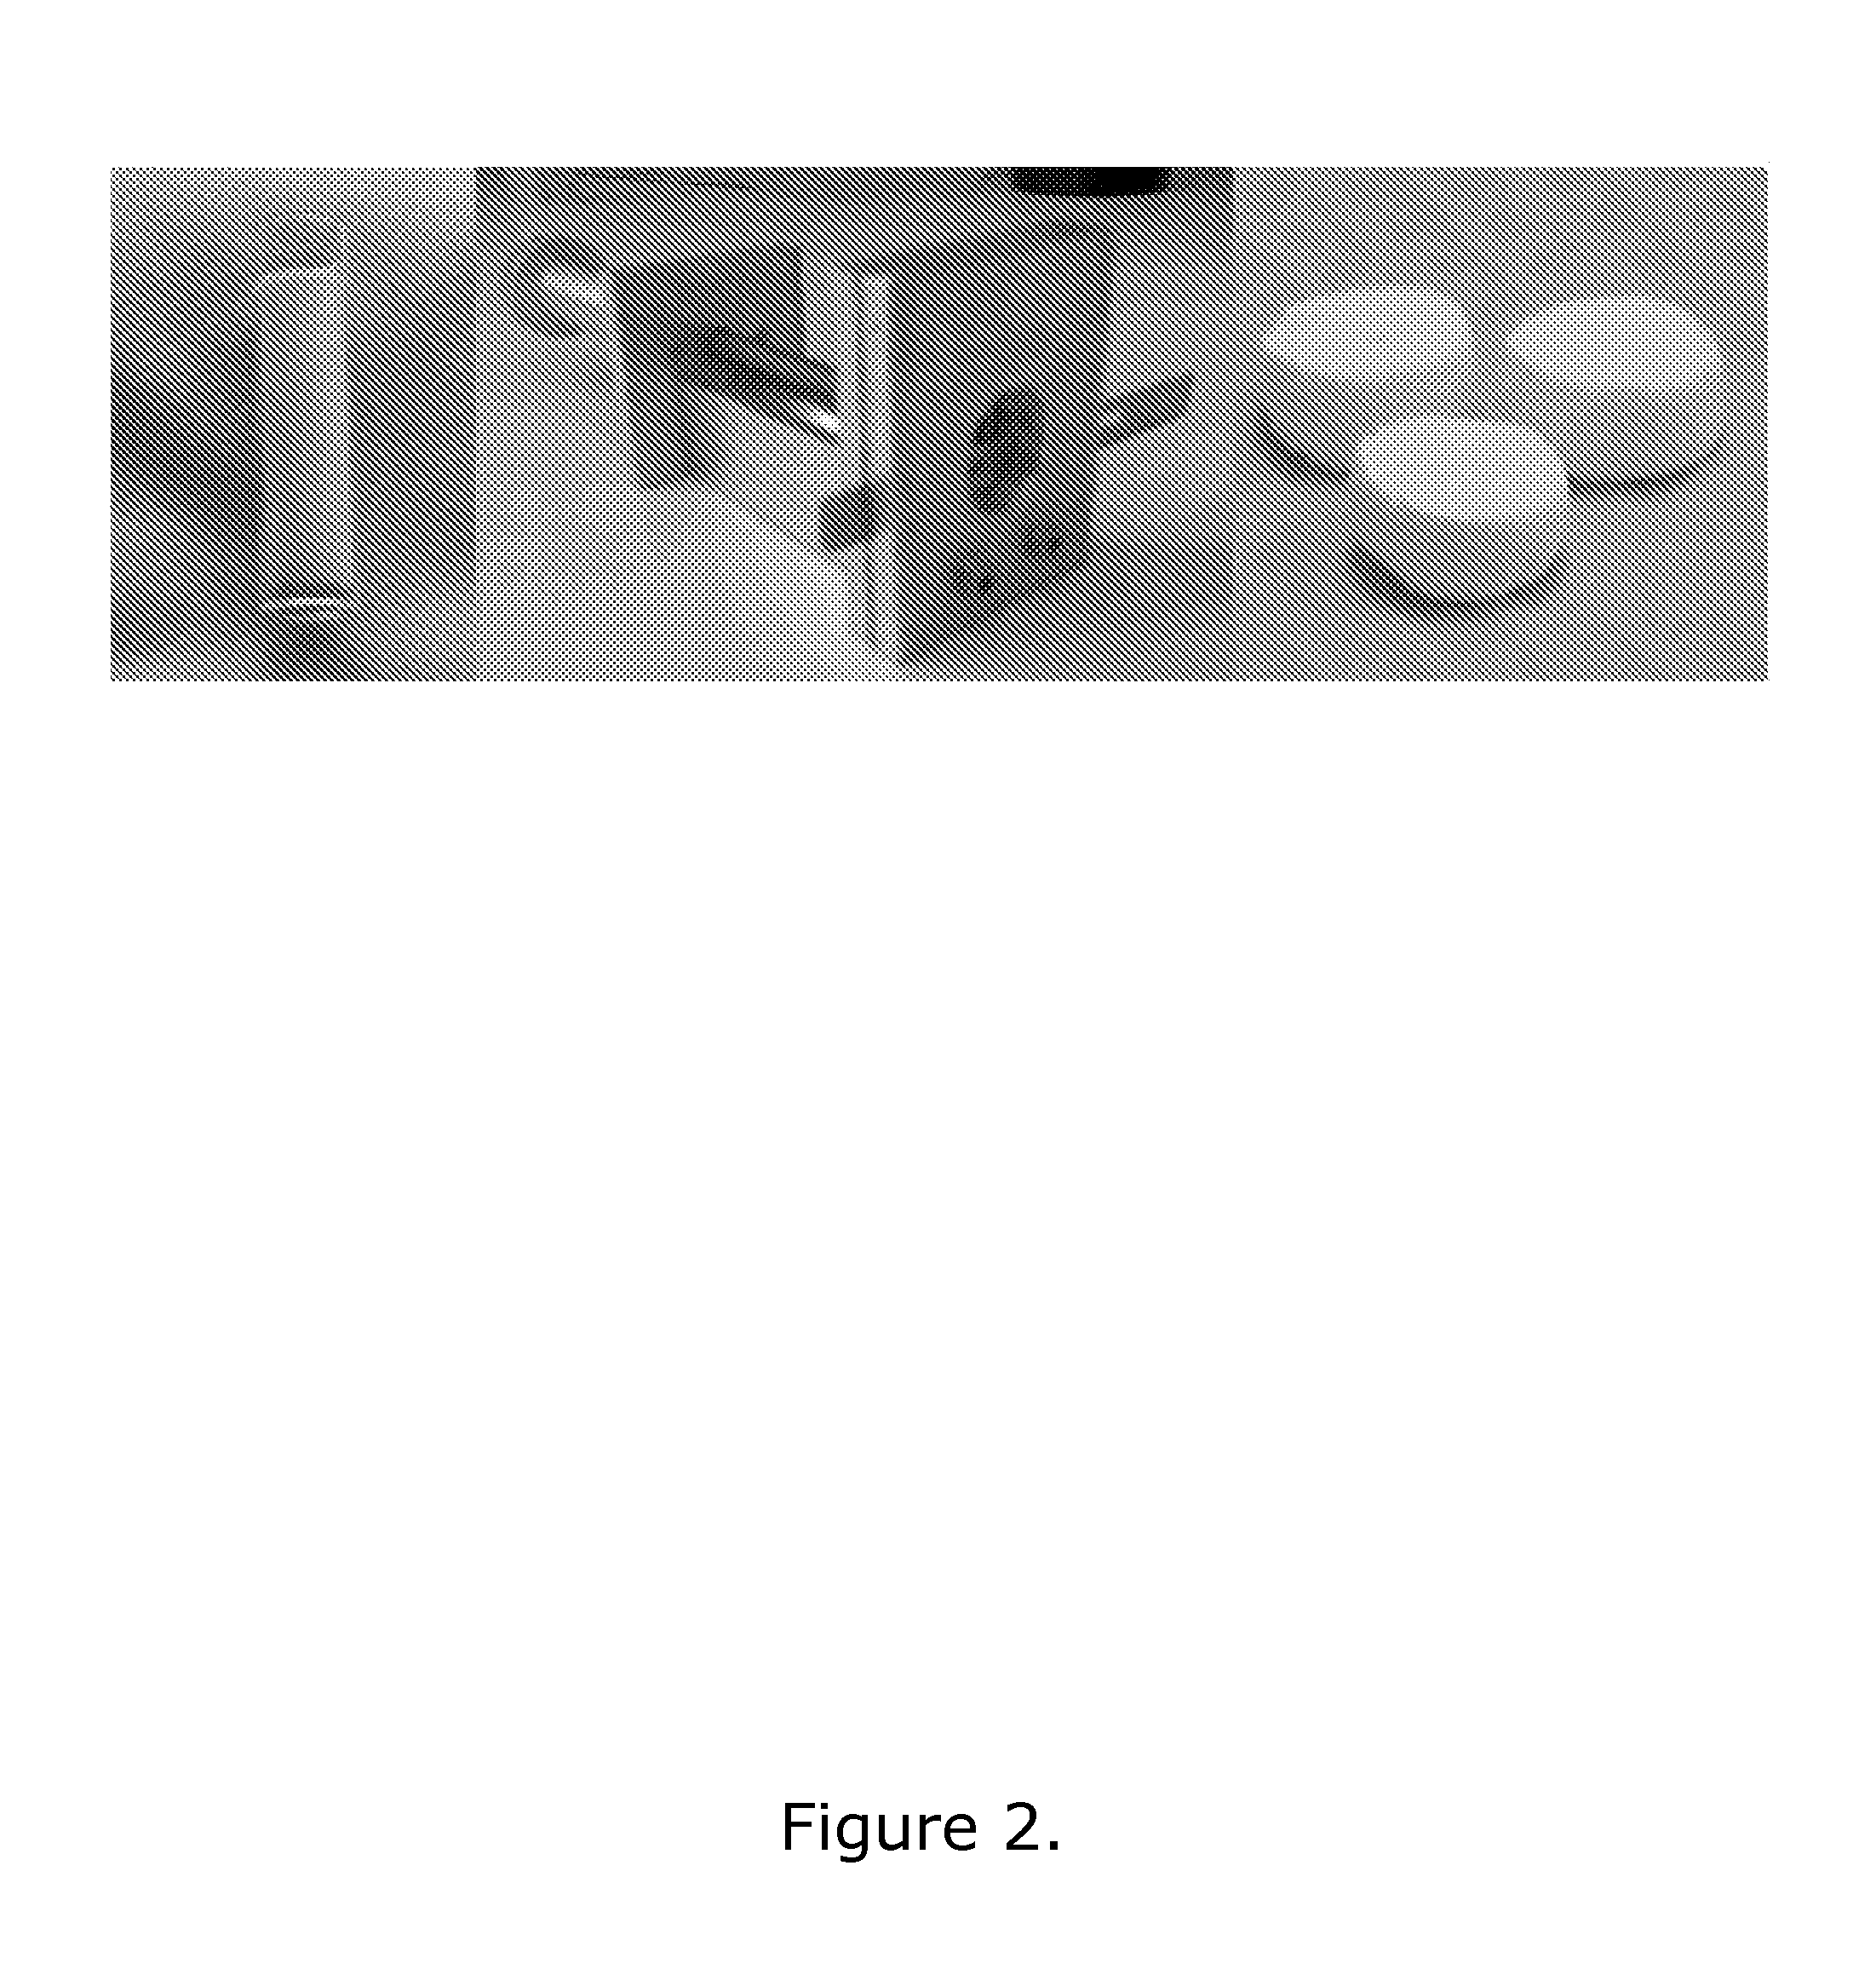 Three-dimensional nanostructured hybrid scaffold and manufacture thereof